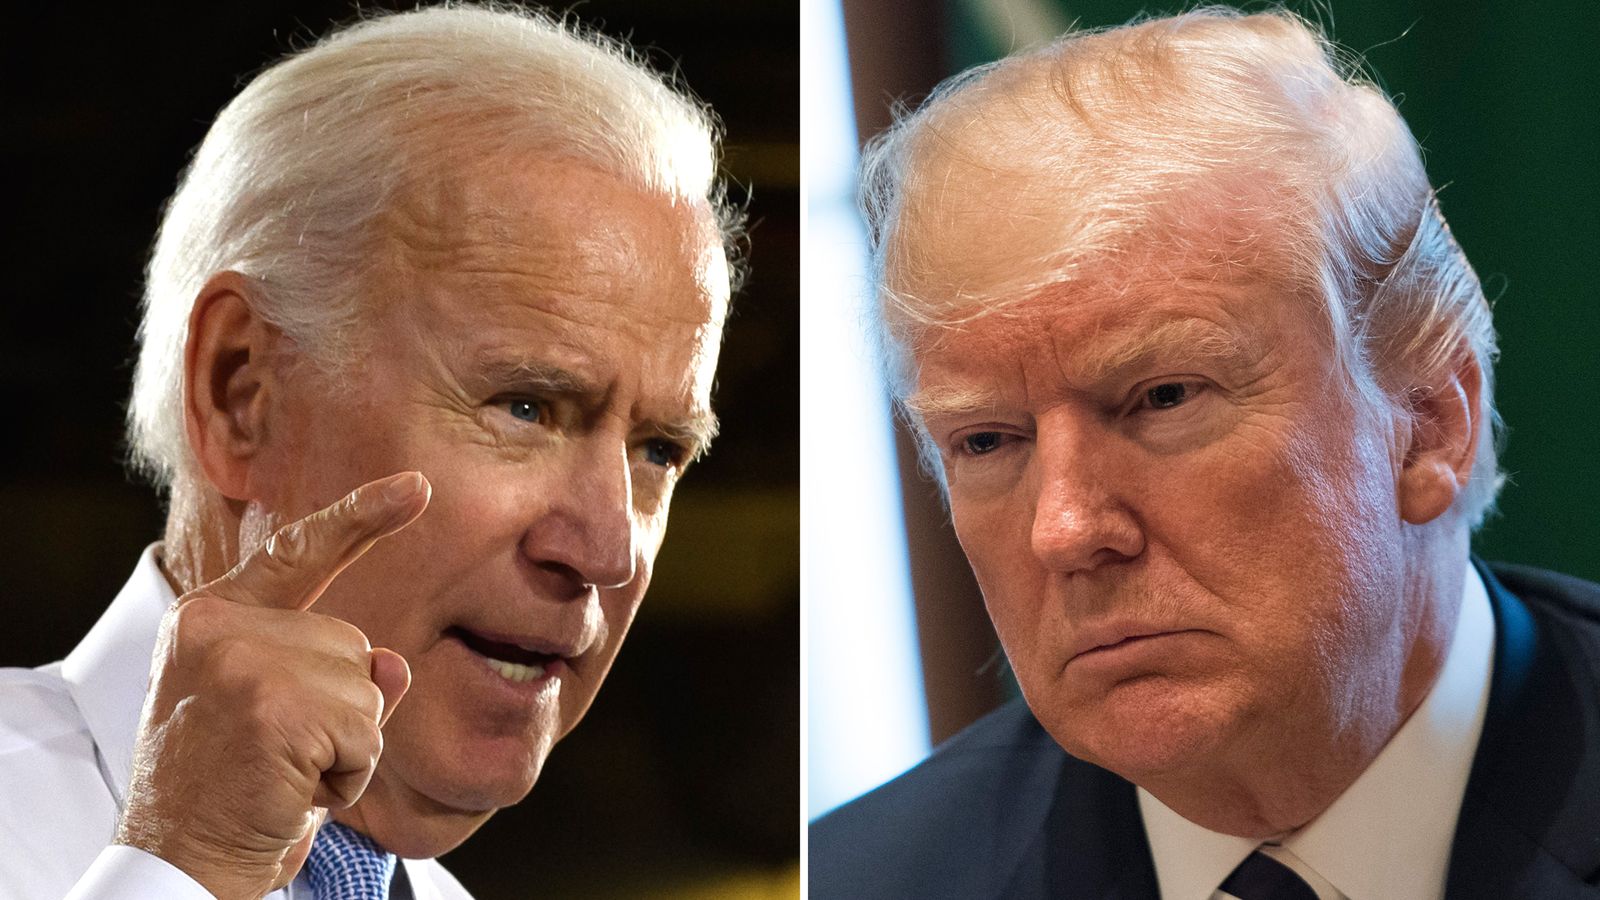 Trump threatens former VP Biden with physical violence ...